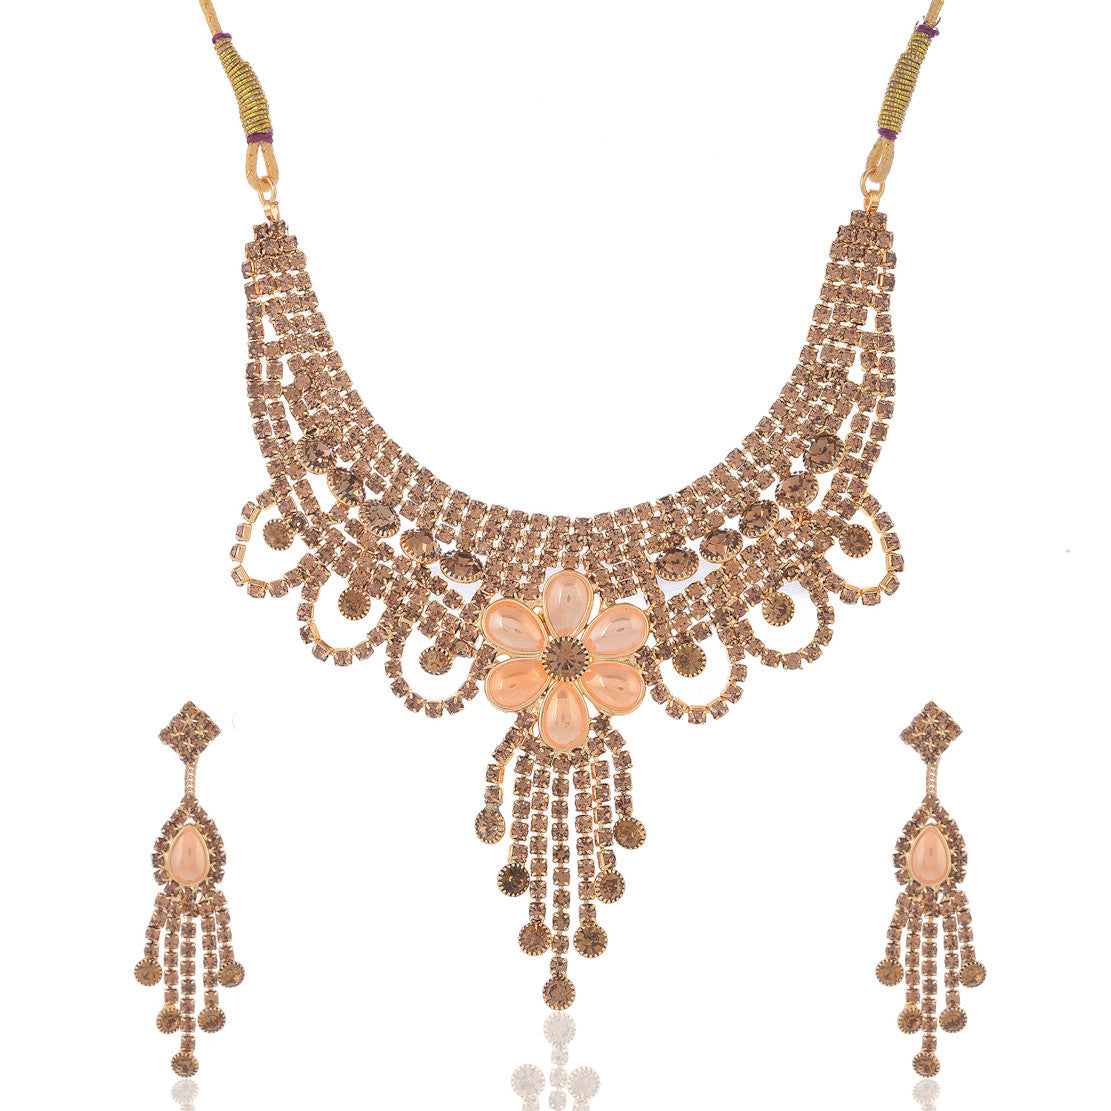  Best Gold Plated Traditional Handcrafted Designed by Mekkna of Necklace, Maang-Tika with Earrings for Women. Now We can Book This Jewellery set online from Mekkna.